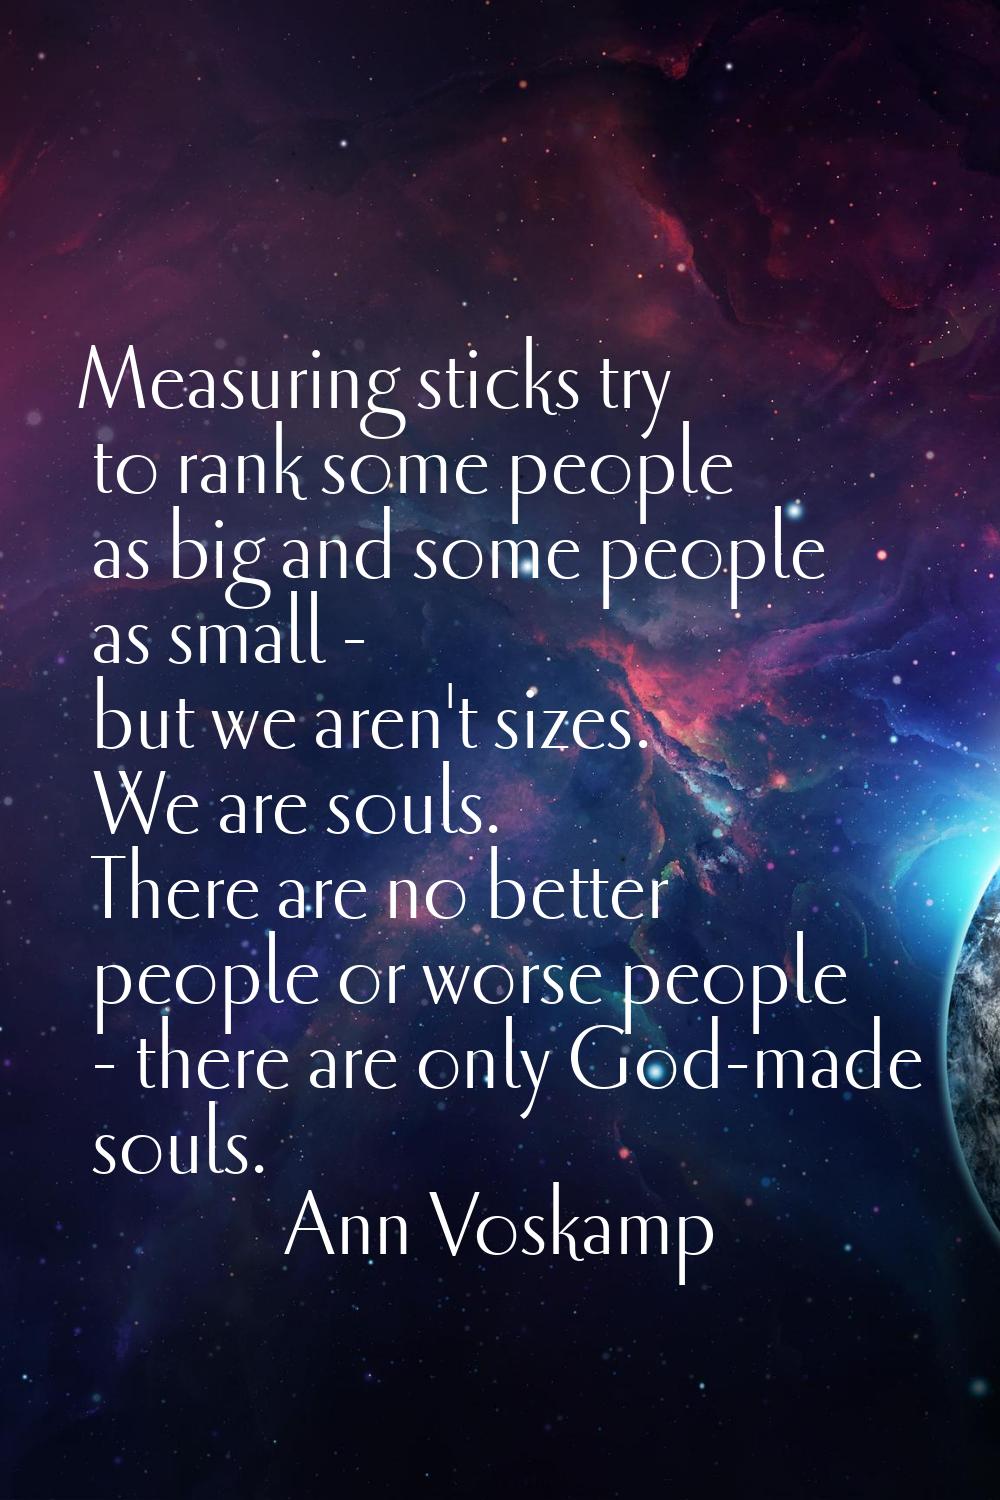 Measuring sticks try to rank some people as big and some people as small - but we aren't sizes. We 